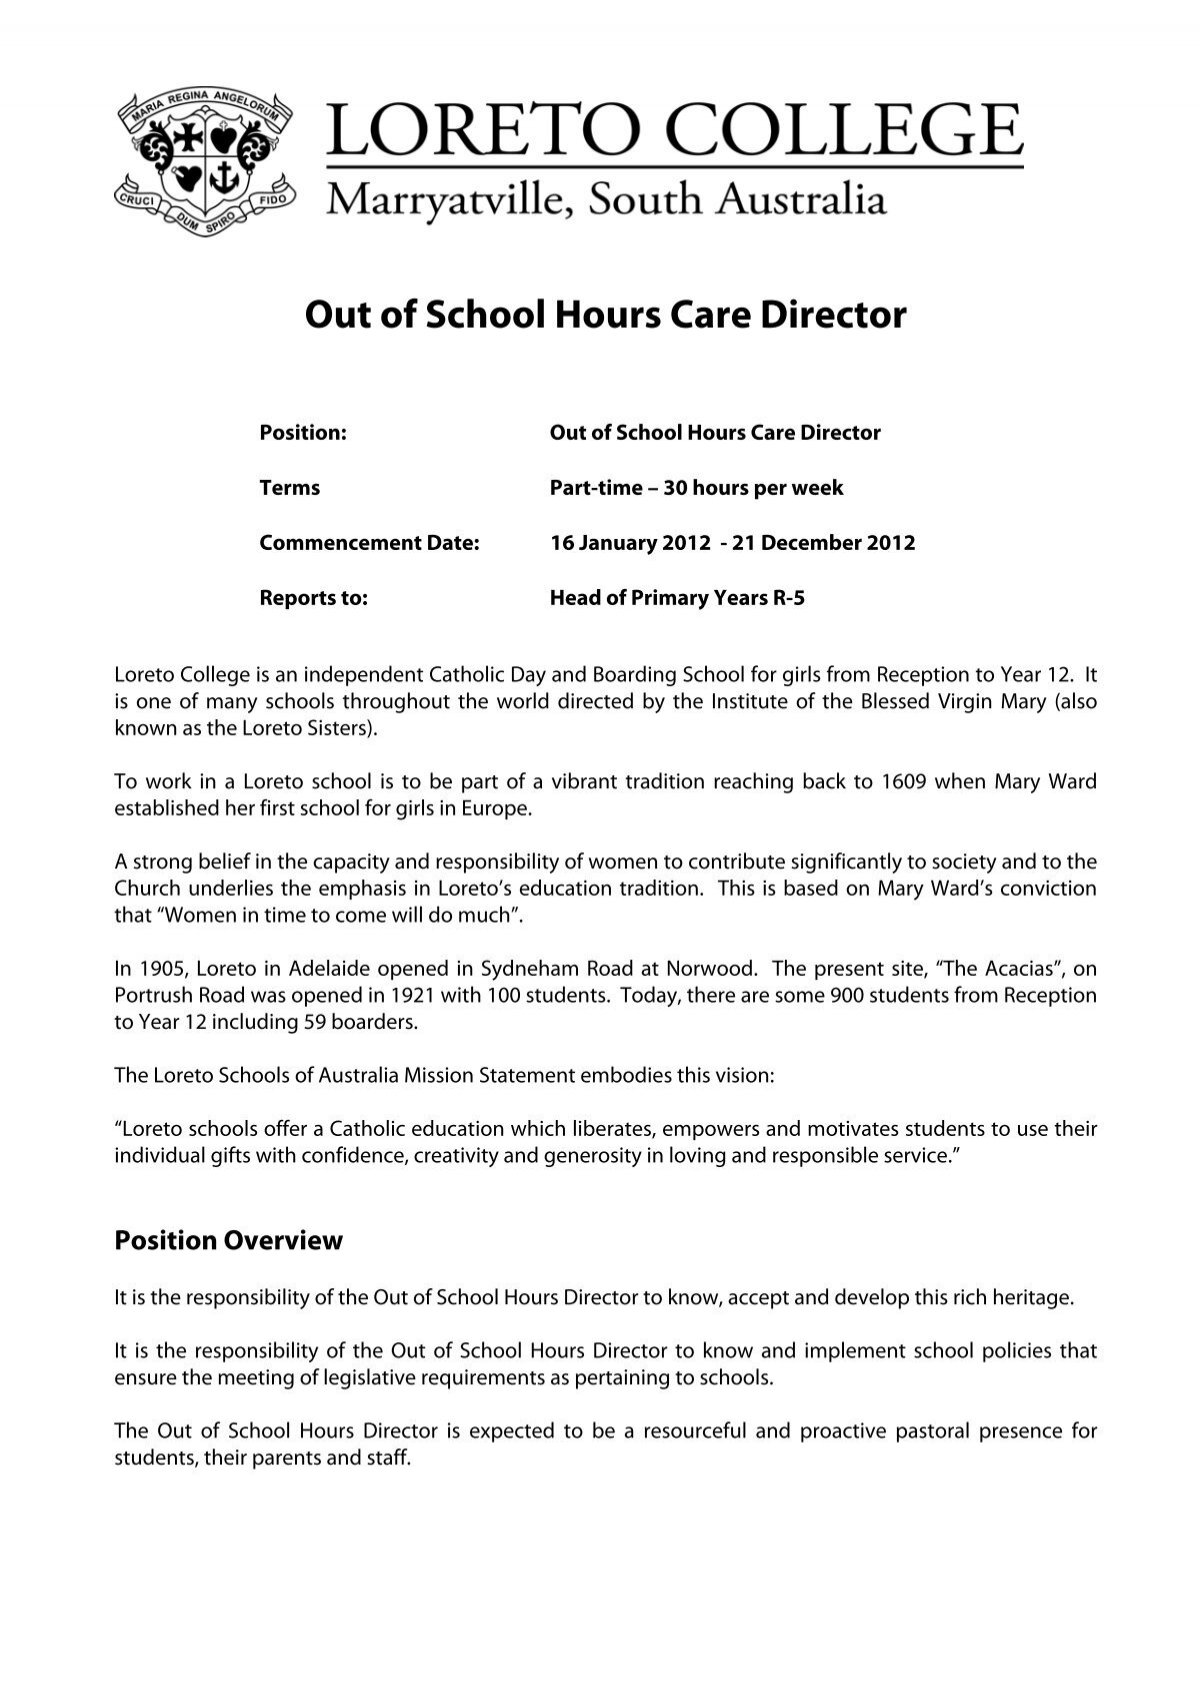 out-of-school-hours-care-director-loreto-college